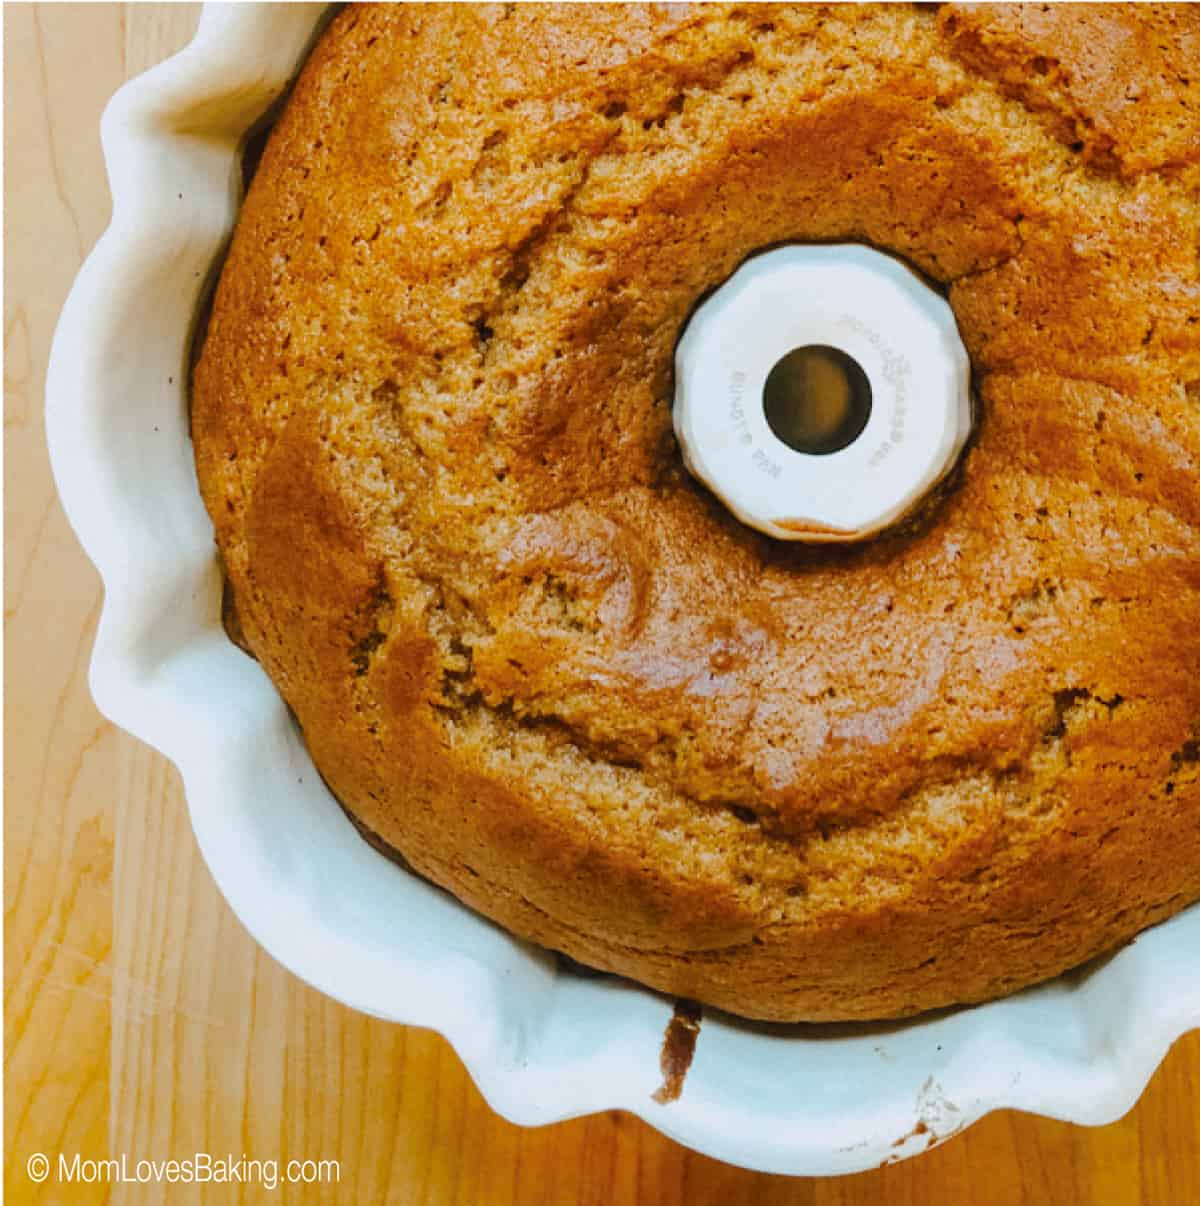 Baked pumpkin bundt cake showing the cake in the pan.